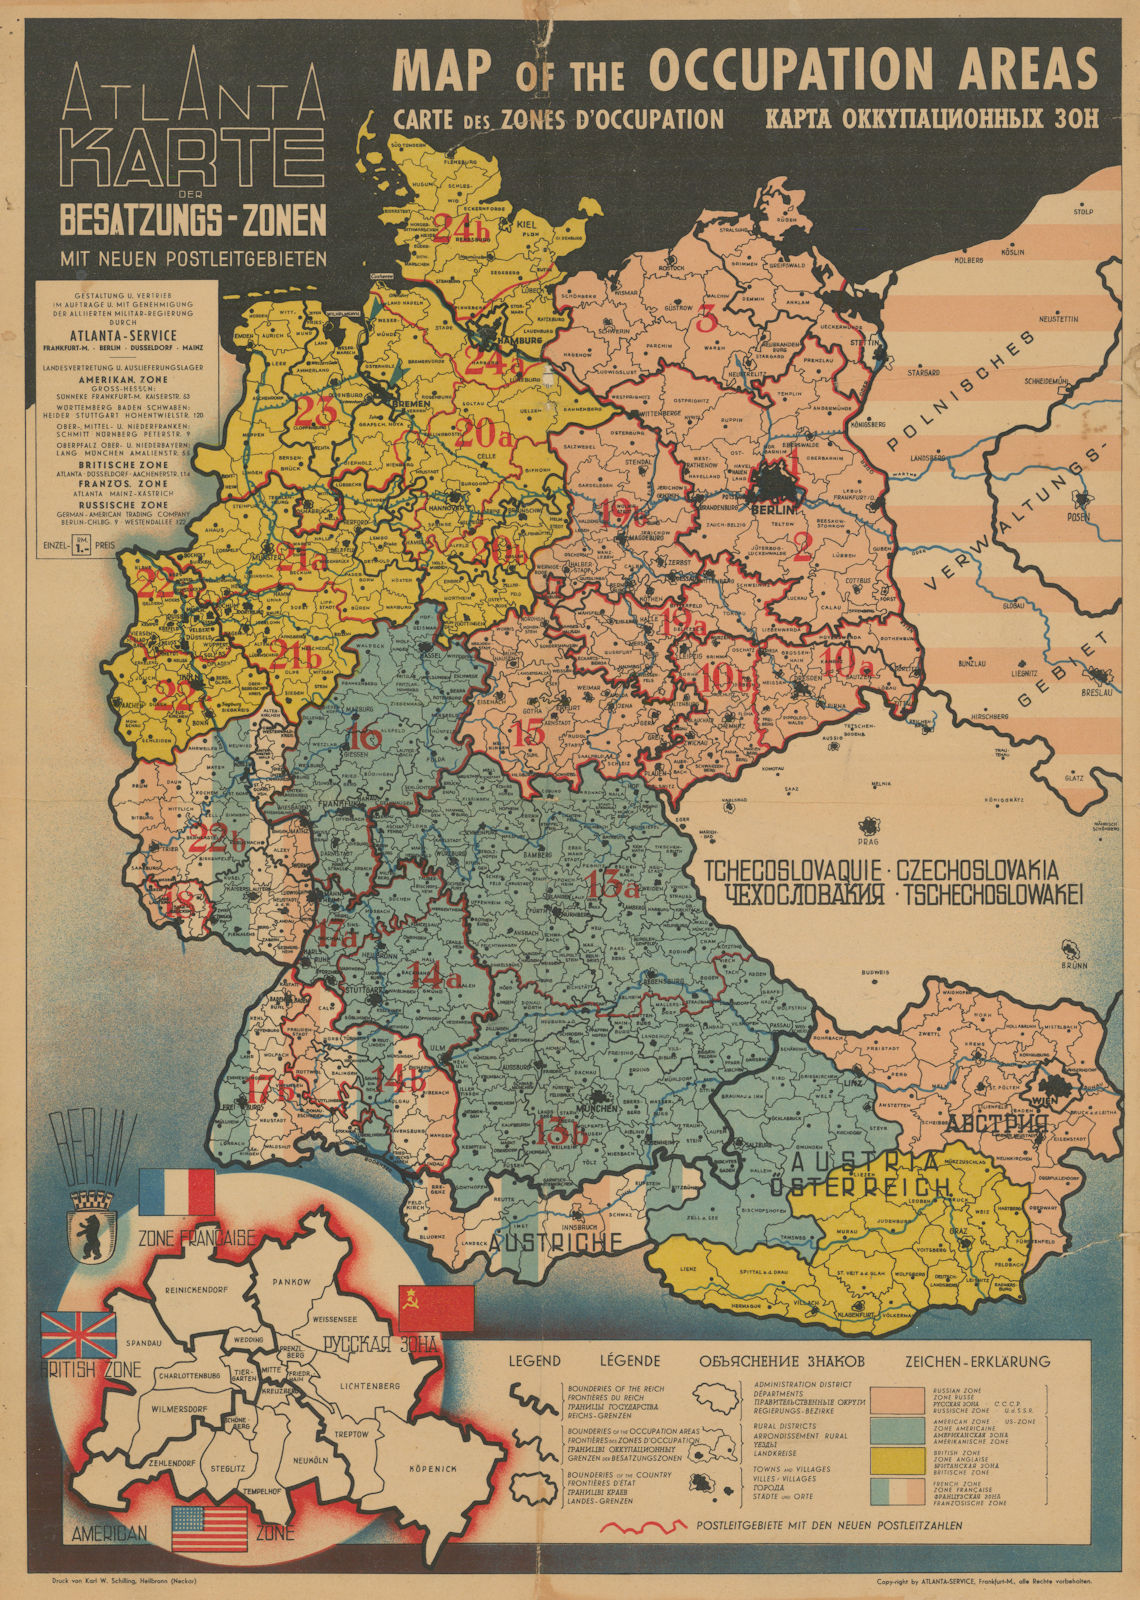 Associate Product Atlanta Karte der Besatzungs-Zonen. Map of the Occupation Areas of Germany 1946